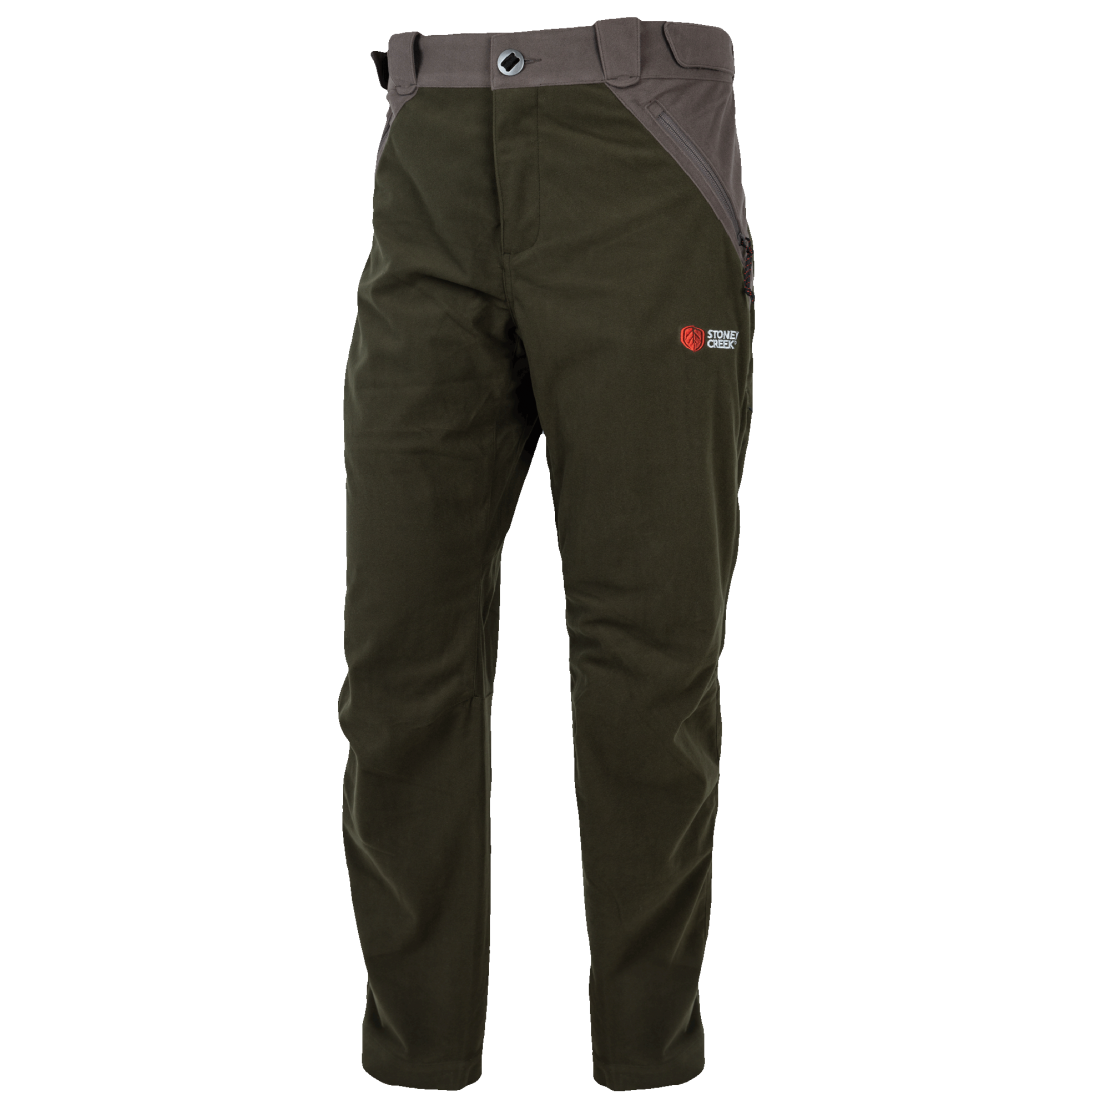 Stoney Creek Mtough Trousers Bayleaf - 2XL / BAYLEAF - Mansfield Hunting & Fishing - Products to prepare for Corona Virus